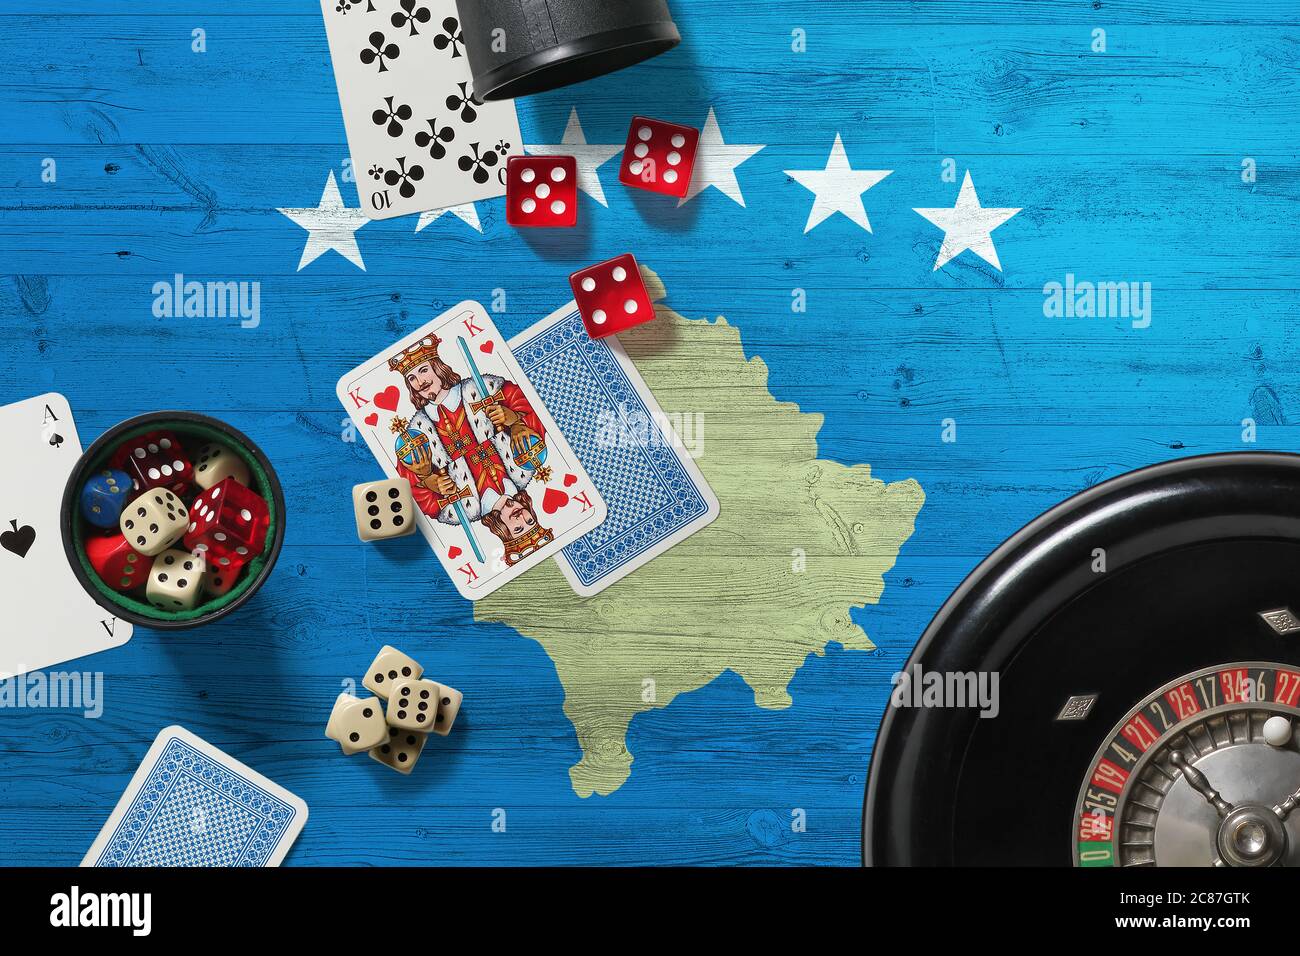 Kosovo casino theme. Aces in poker game, cards and chips on red table with national wooden flag background. Gambling and betting. Stock Photo